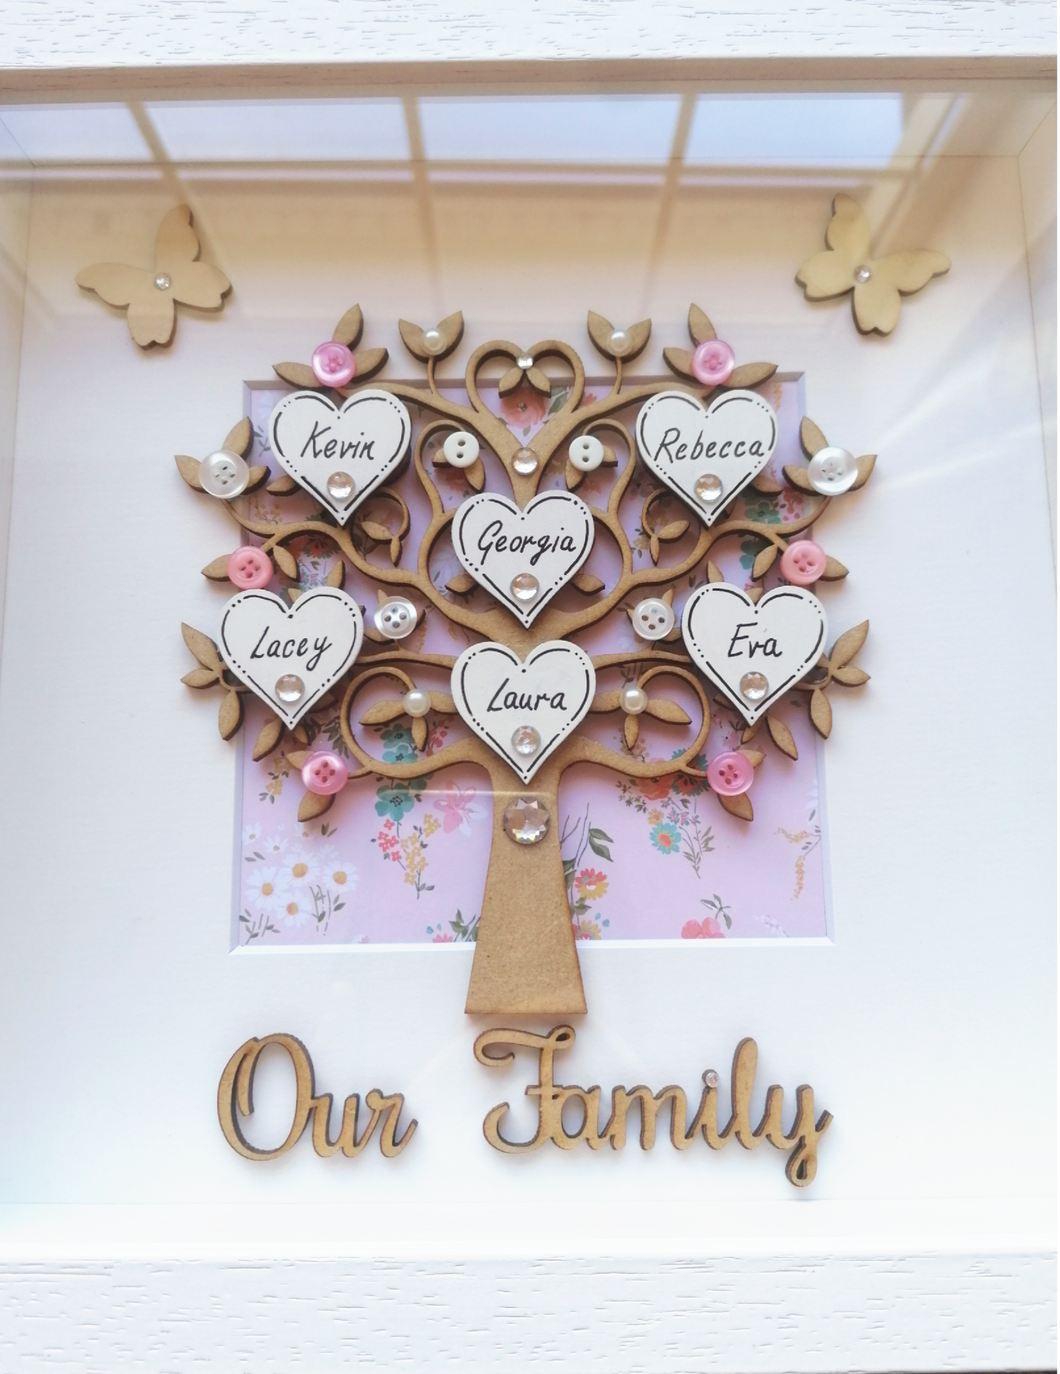 Framed family tree.   Beautifully presented in a 10x10